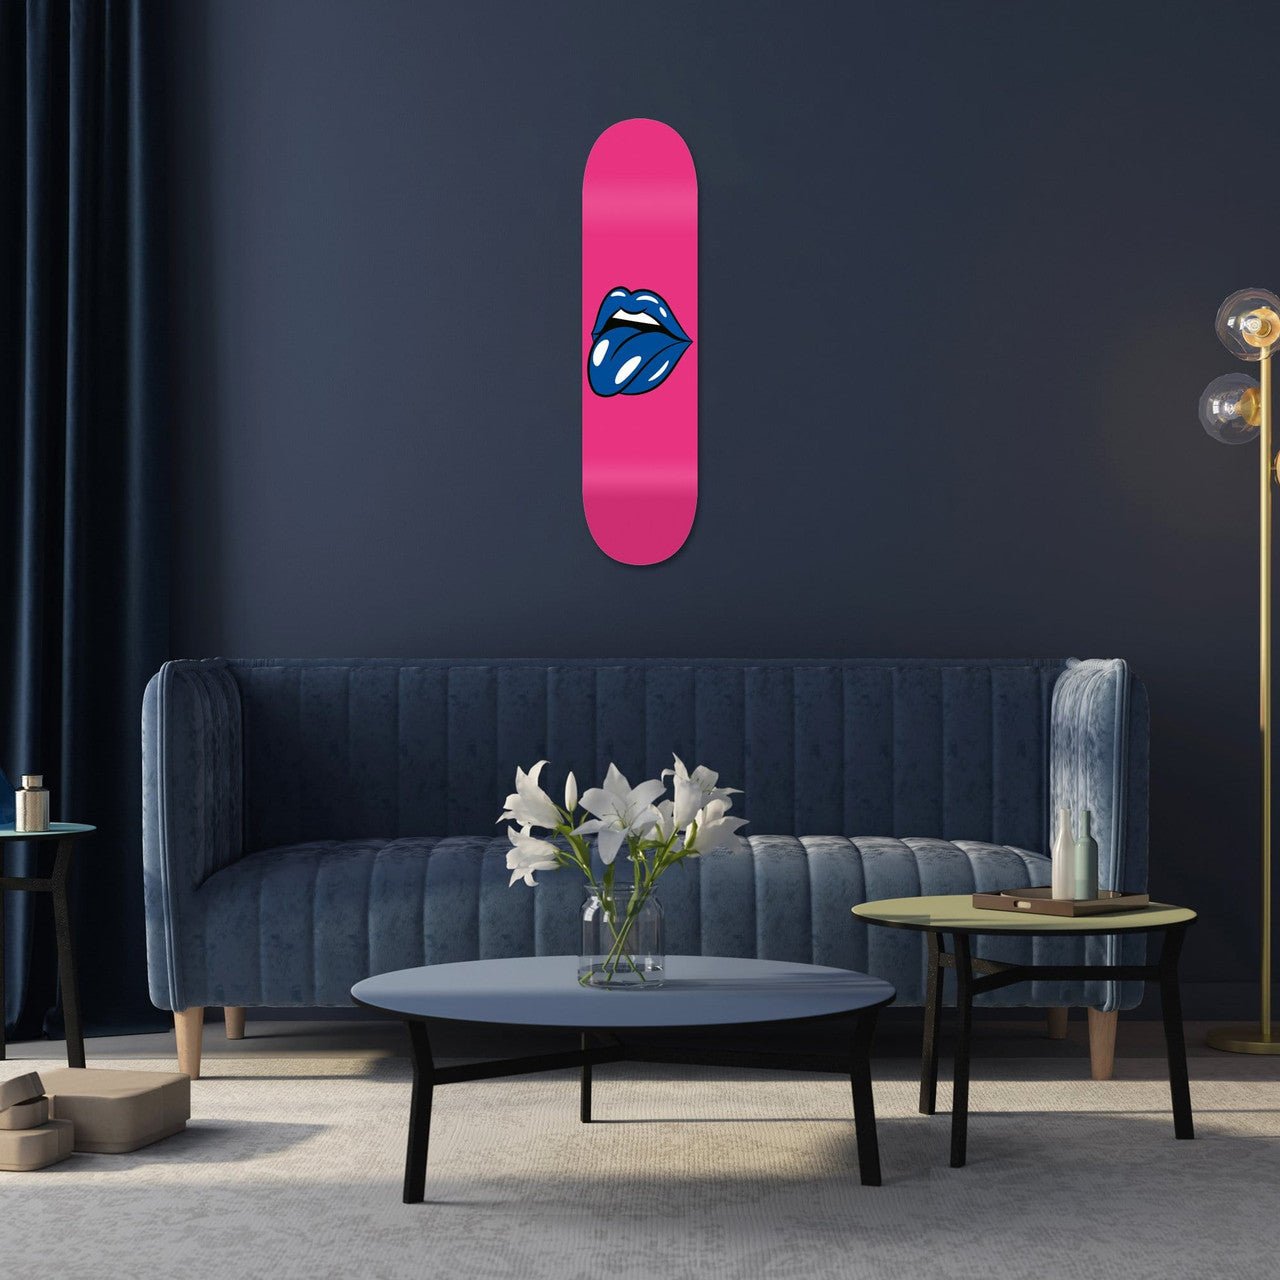 Bundle: "Yellow & Pink & Red Lips" - Skateboard - The Art Lab Acrylic Glass Art - Skateboards, Surfboards & Glass Prints Wall Decor for your Home.